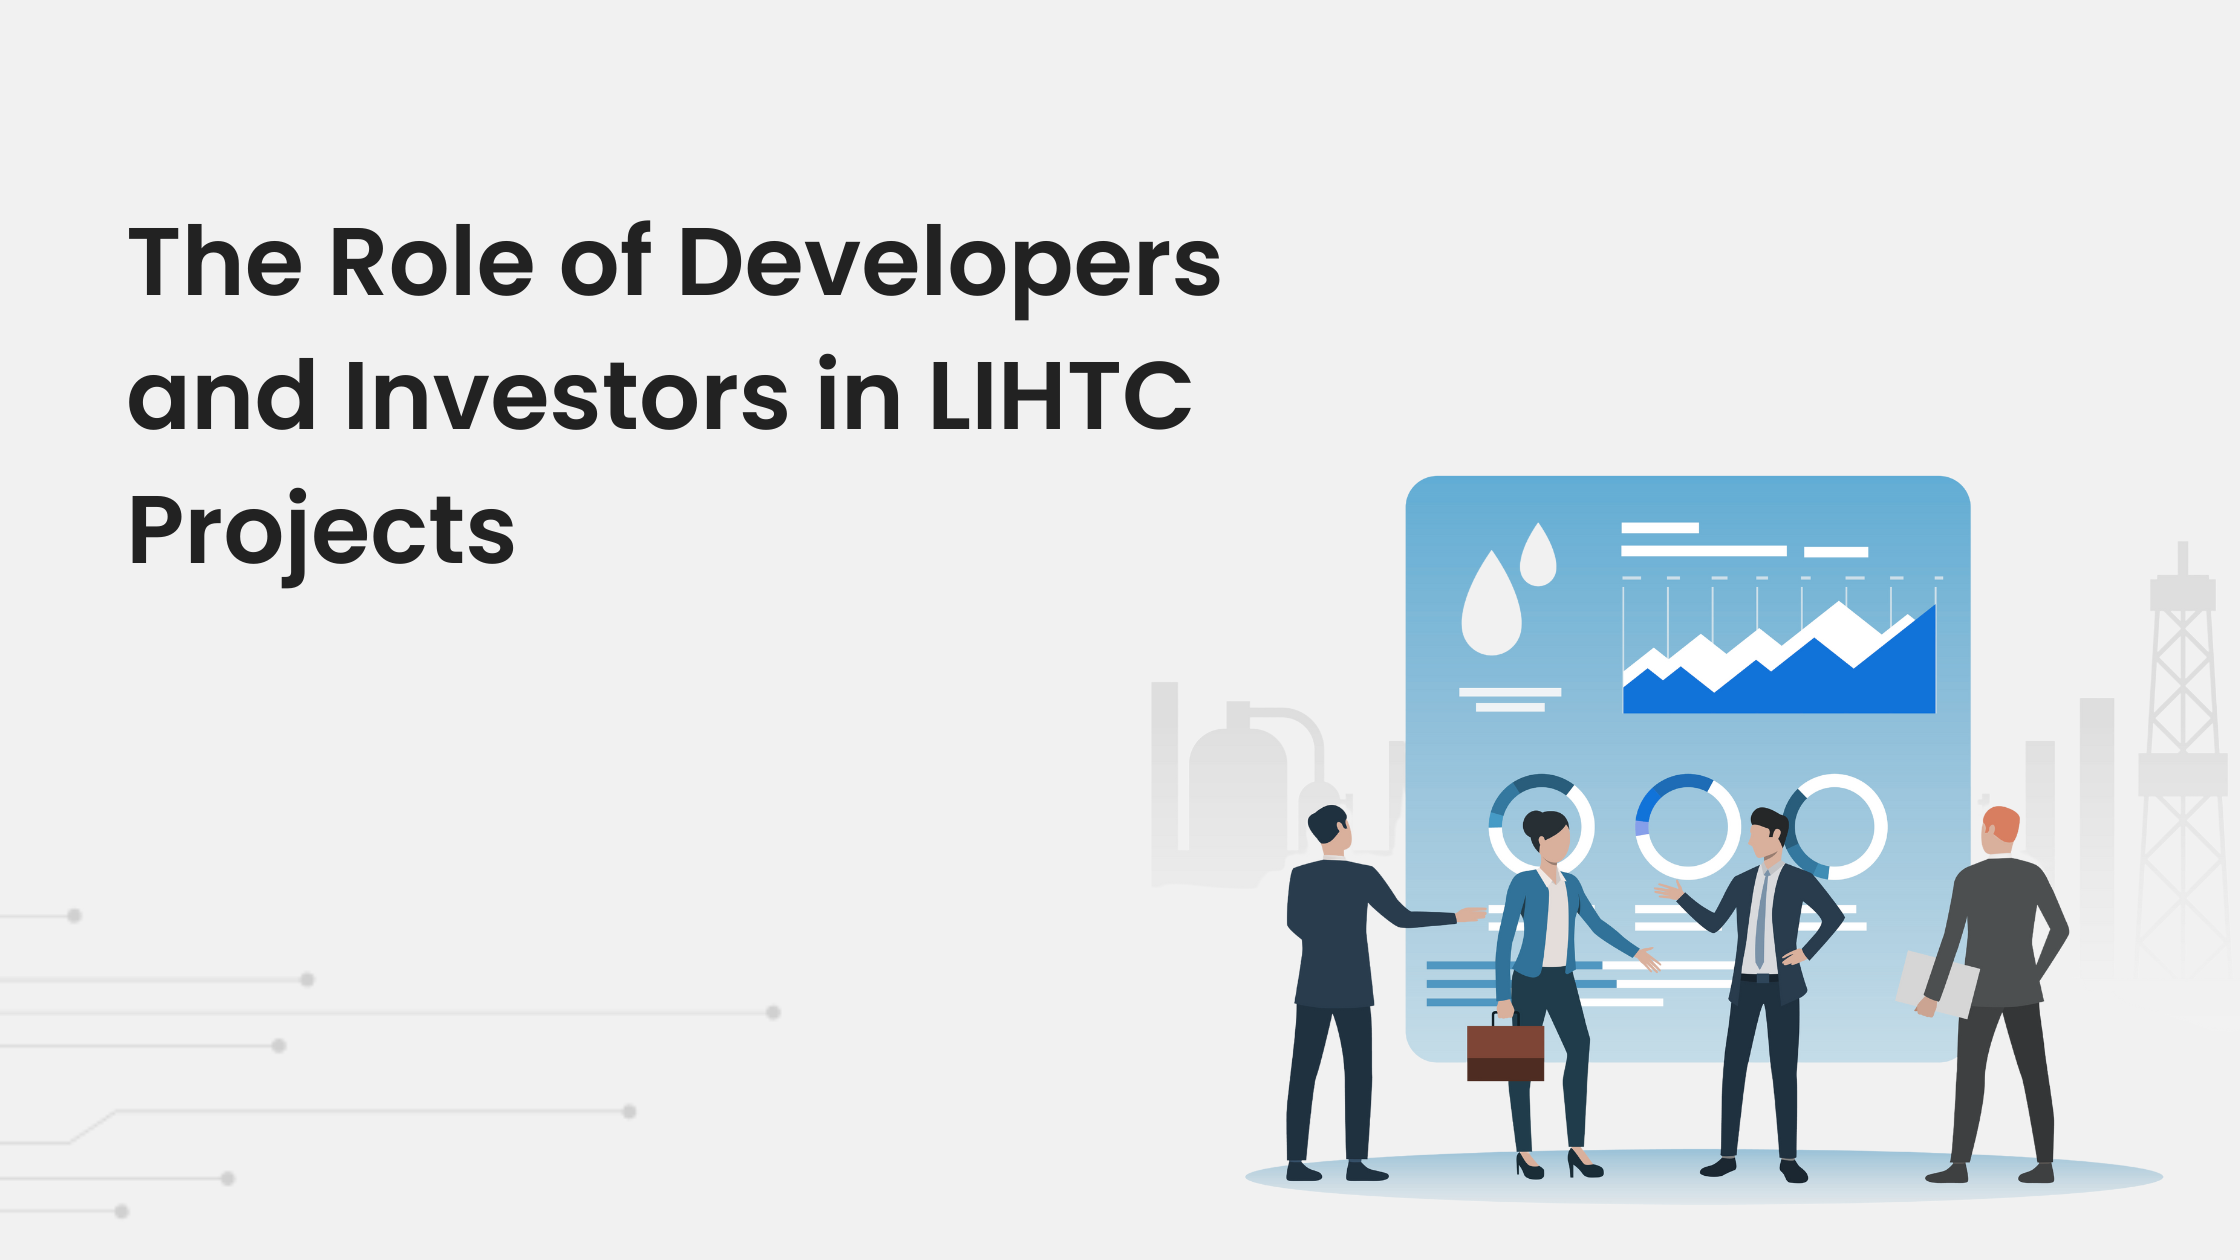 The Role of Developers and Investors in LIHTC Projects